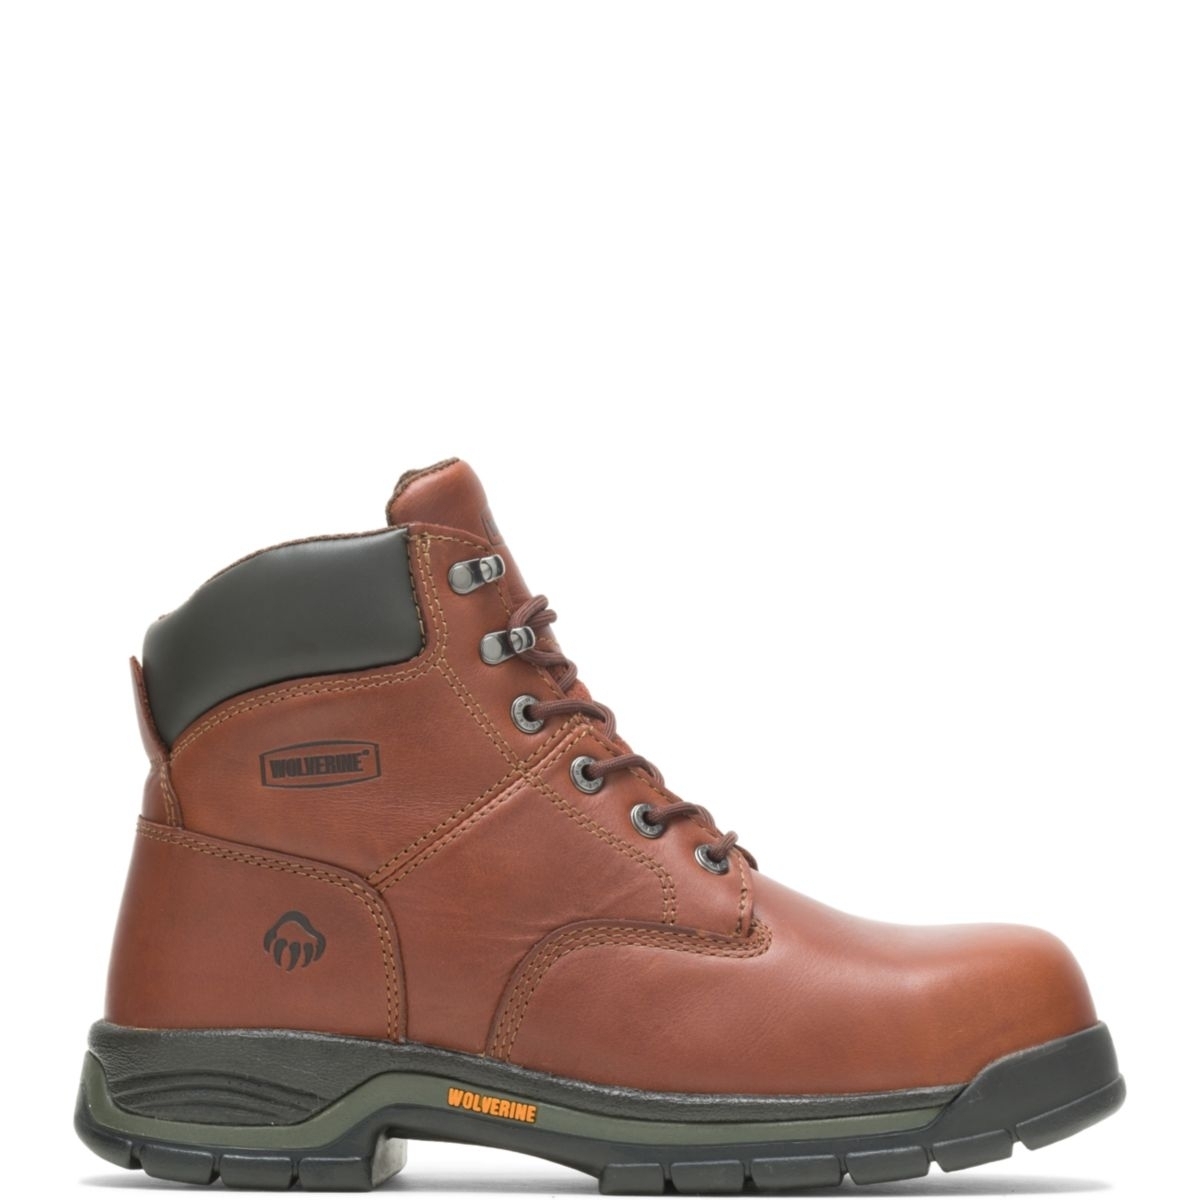 WOLVERINE Men's Harrison 6 Lace-Up Steel Toe Work Boot Brown - W04904 BROWN LEATHER - BROWN LEATHER, 8.5 X-Wide